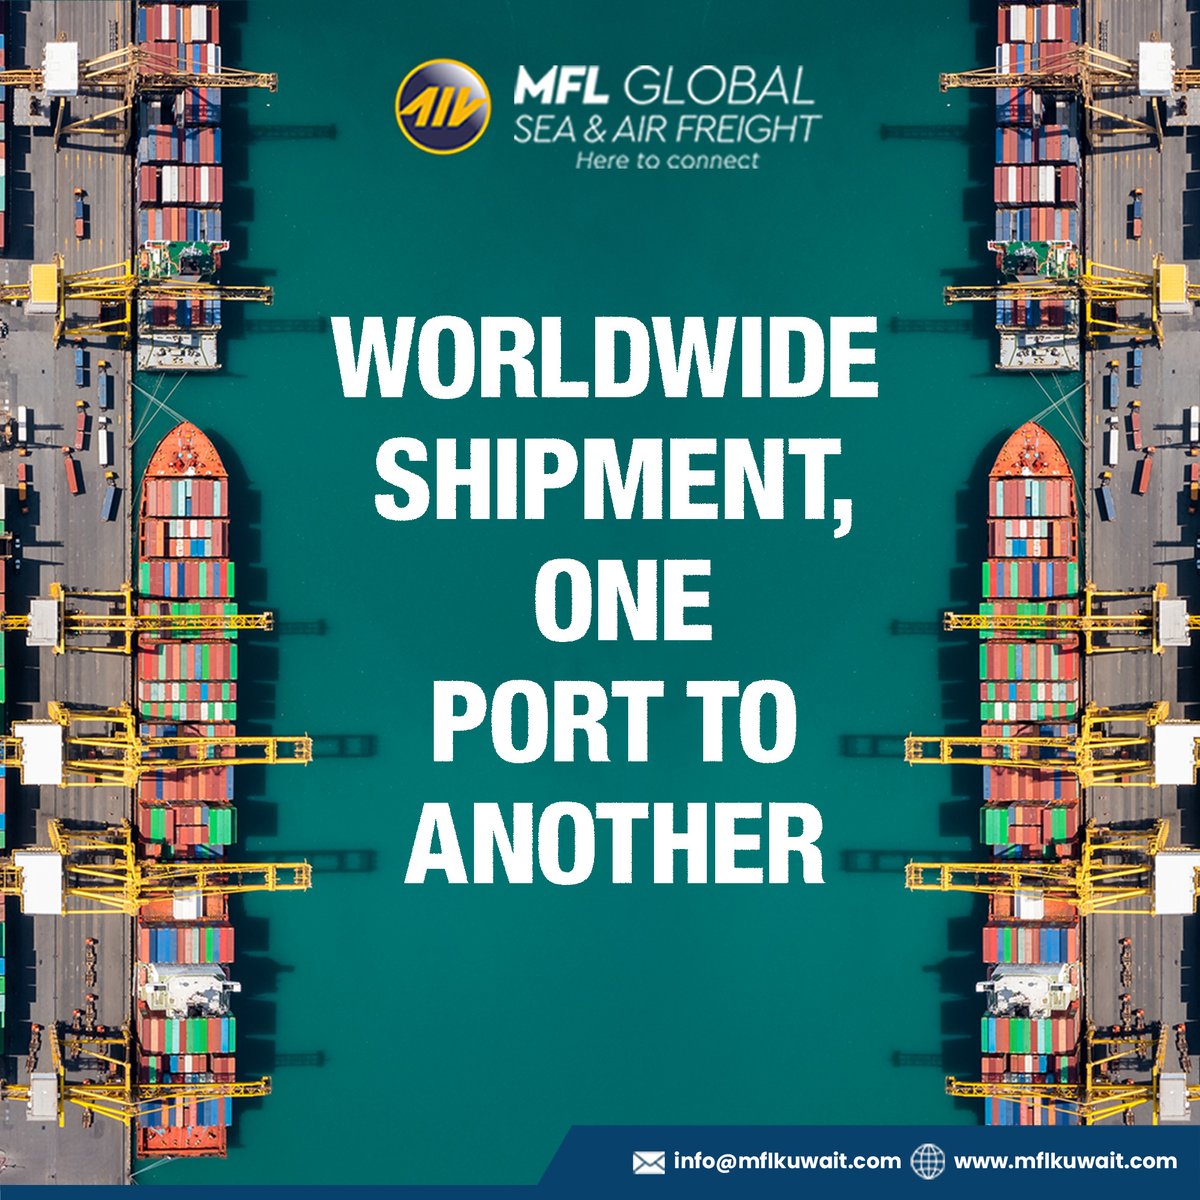 Our Port to Port Logistics Services seamlessly connect your cargo across the seas, ensuring swift and secure journeys from one port to another.

#FCL #FCLcargo #seafreight #seafreightservices  #oceancargo  #mfldubai #mflkuwait